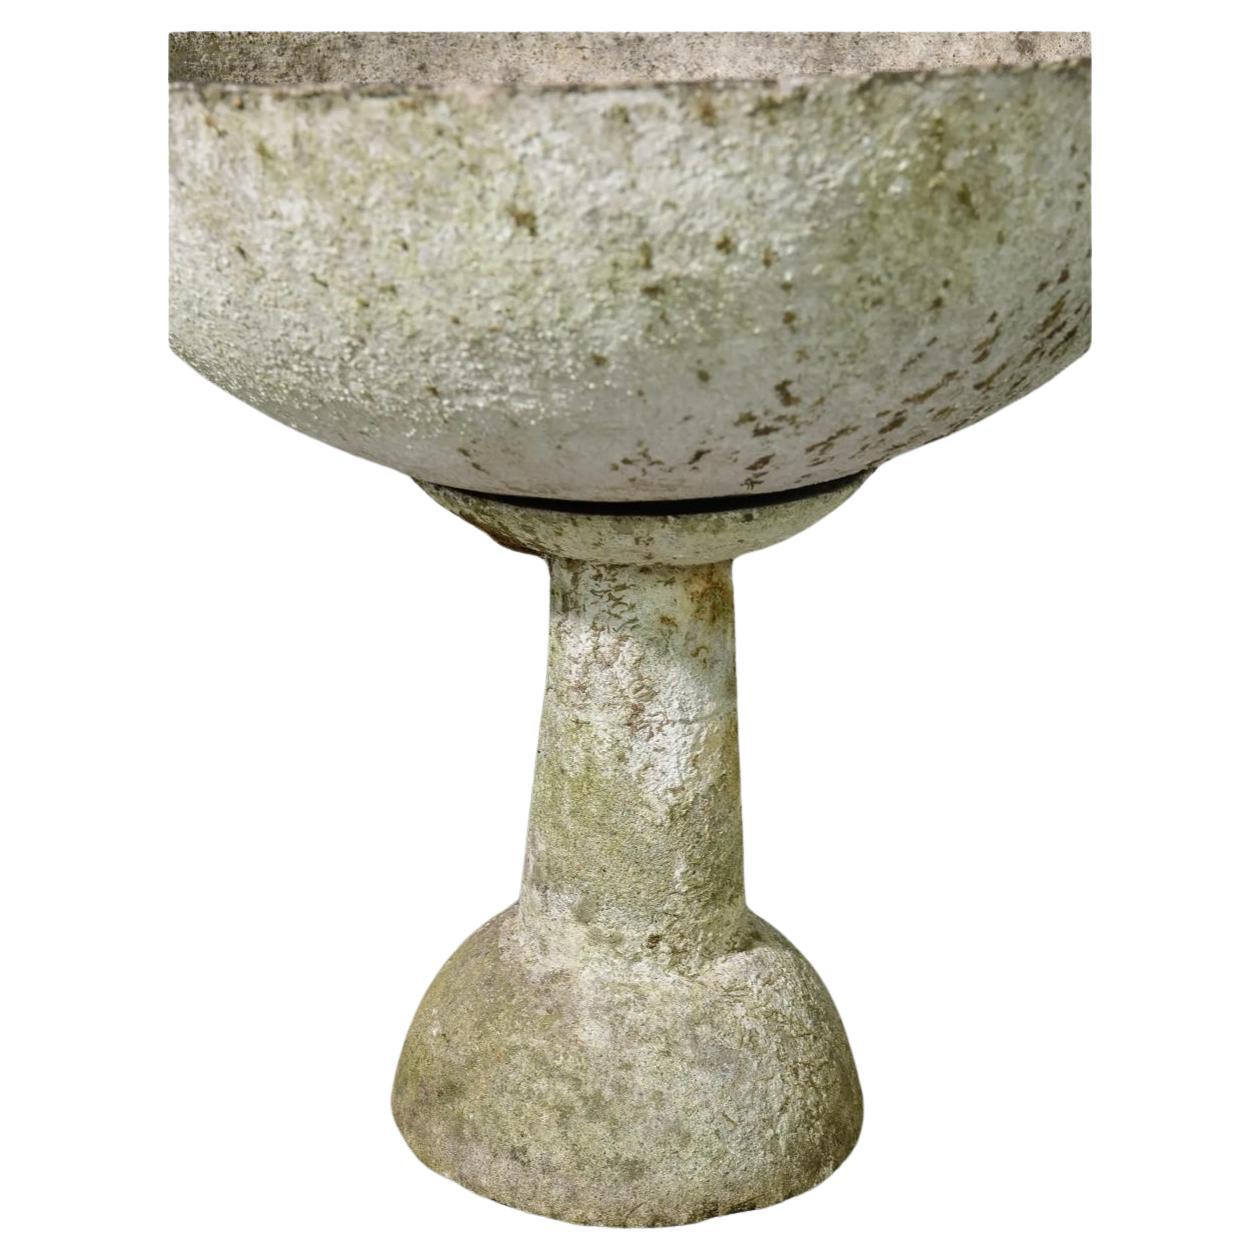 Pair of European cast stone / pottery saucer planters on plinths - Similar in style to Willy Guhl. Wonderful old patina.